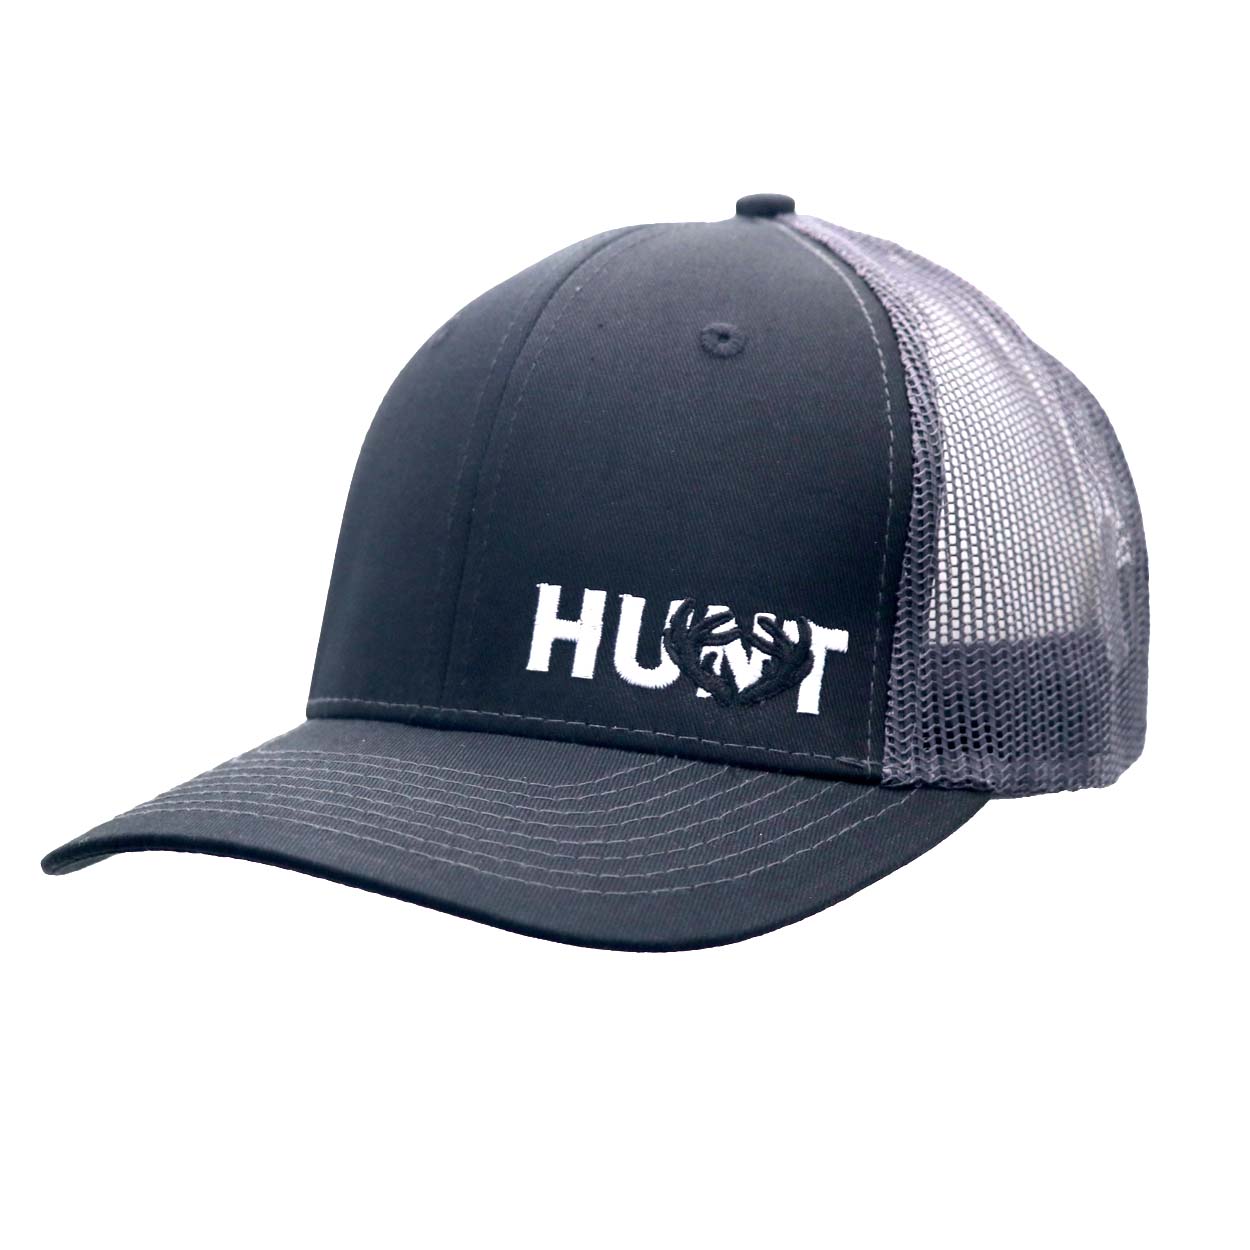 Hunt Rack Logo Night Out Embroidered Snapback Trucker Hat Black/Gray